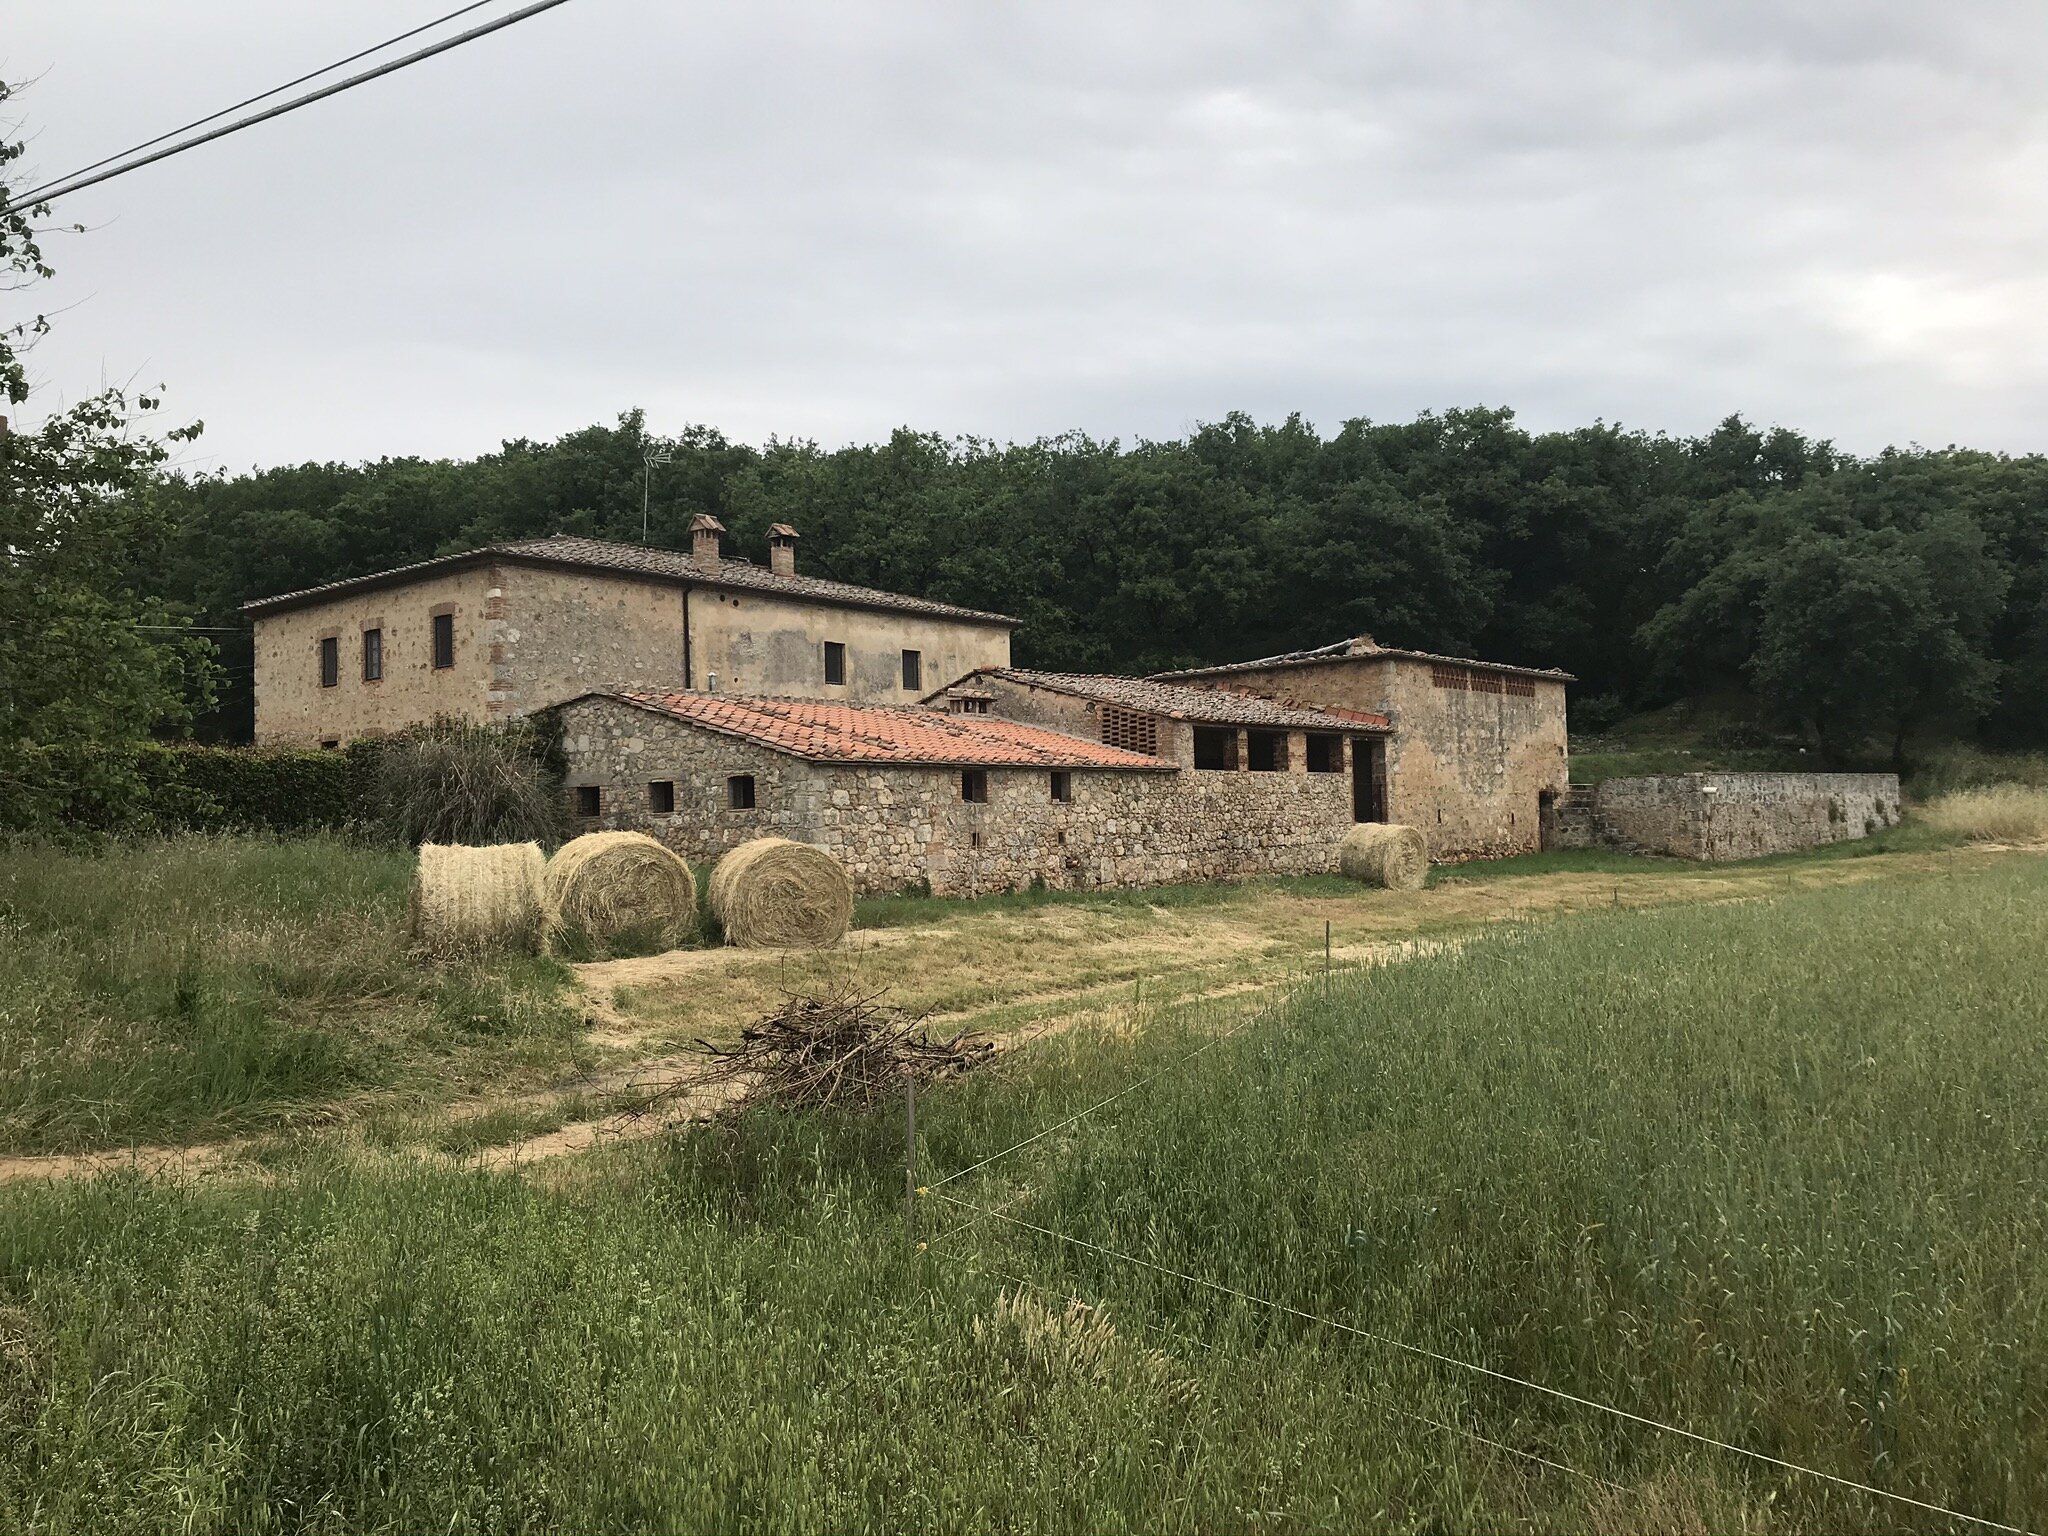  MONTERIGGIONI, Siena, Italy. June 4th, 2021. PICTURED: A typical farmhouse seen from a small road. 